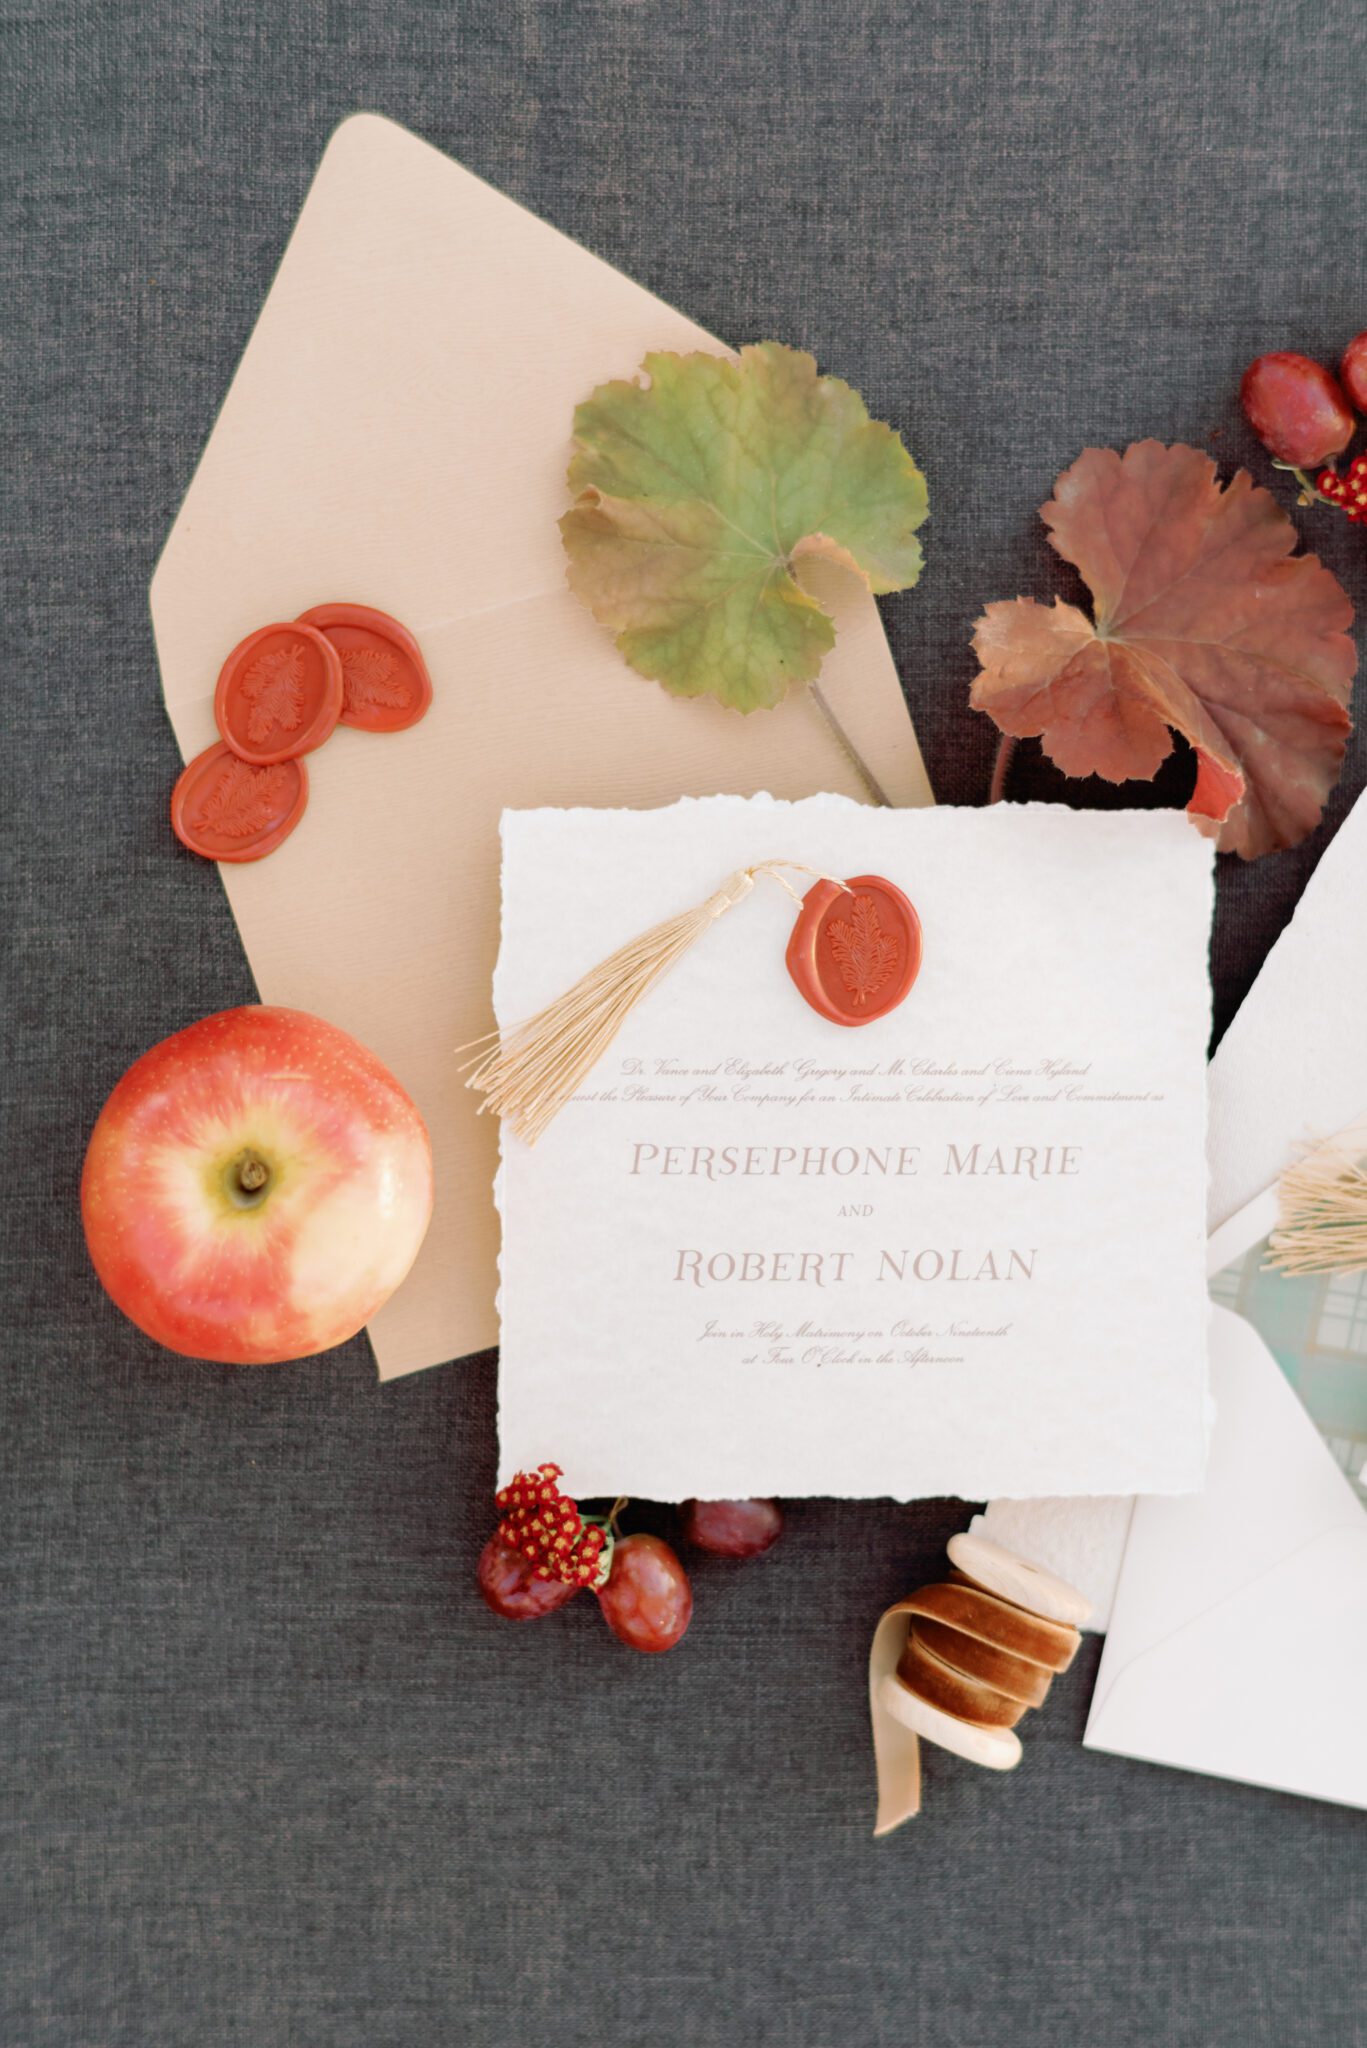 Wedding invitation flatlay with fall wedding stationery featuring handmade paper with a hand deckled edge and crimson wax seals with gold tassel accents.